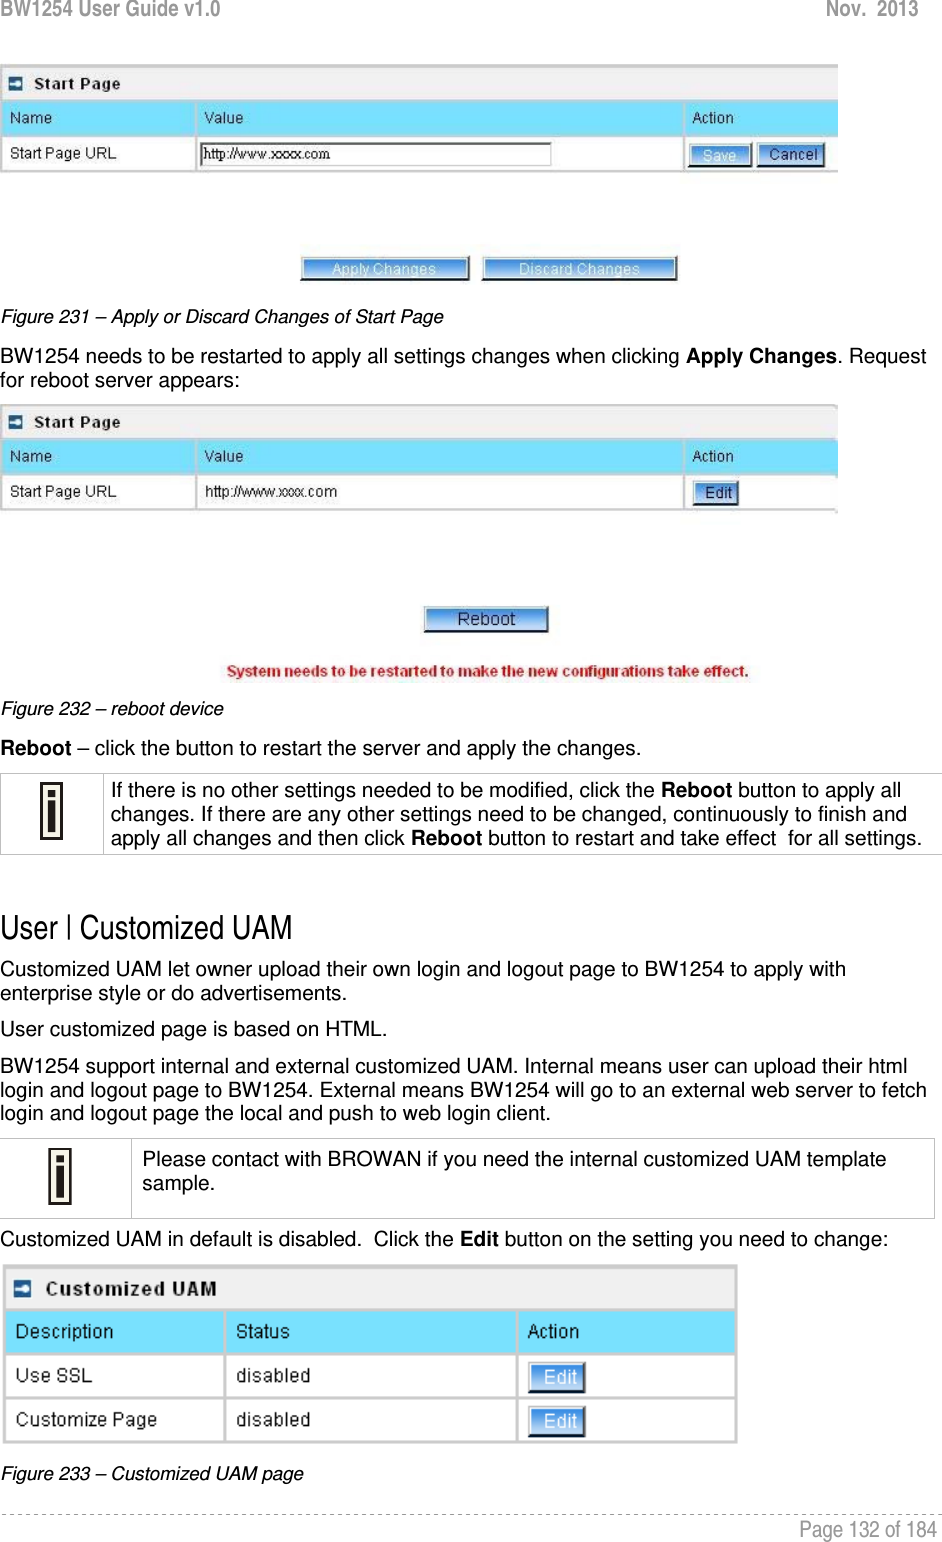 BW1254 User Guide v1.0  Nov.  2013     Page 132 of 184    Figure 231 – Apply or Discard Changes of Start Page BW1254 needs to be restarted to apply all settings changes when clicking Apply Changes. Request for reboot server appears:  Figure 232 – reboot device Reboot – click the button to restart the server and apply the changes.  If there is no other settings needed to be modified, click the Reboot button to apply all changes. If there are any other settings need to be changed, continuously to finish and apply all changes and then click Reboot button to restart and take effect  for all settings.  User | Customized UAM Customized UAM let owner upload their own login and logout page to BW1254 to apply with enterprise style or do advertisements. User customized page is based on HTML.  BW1254 support internal and external customized UAM. Internal means user can upload their html login and logout page to BW1254. External means BW1254 will go to an external web server to fetch login and logout page the local and push to web login client.  Please contact with BROWAN if you need the internal customized UAM template sample. Customized UAM in default is disabled.  Click the Edit button on the setting you need to change:  Figure 233 – Customized UAM page 